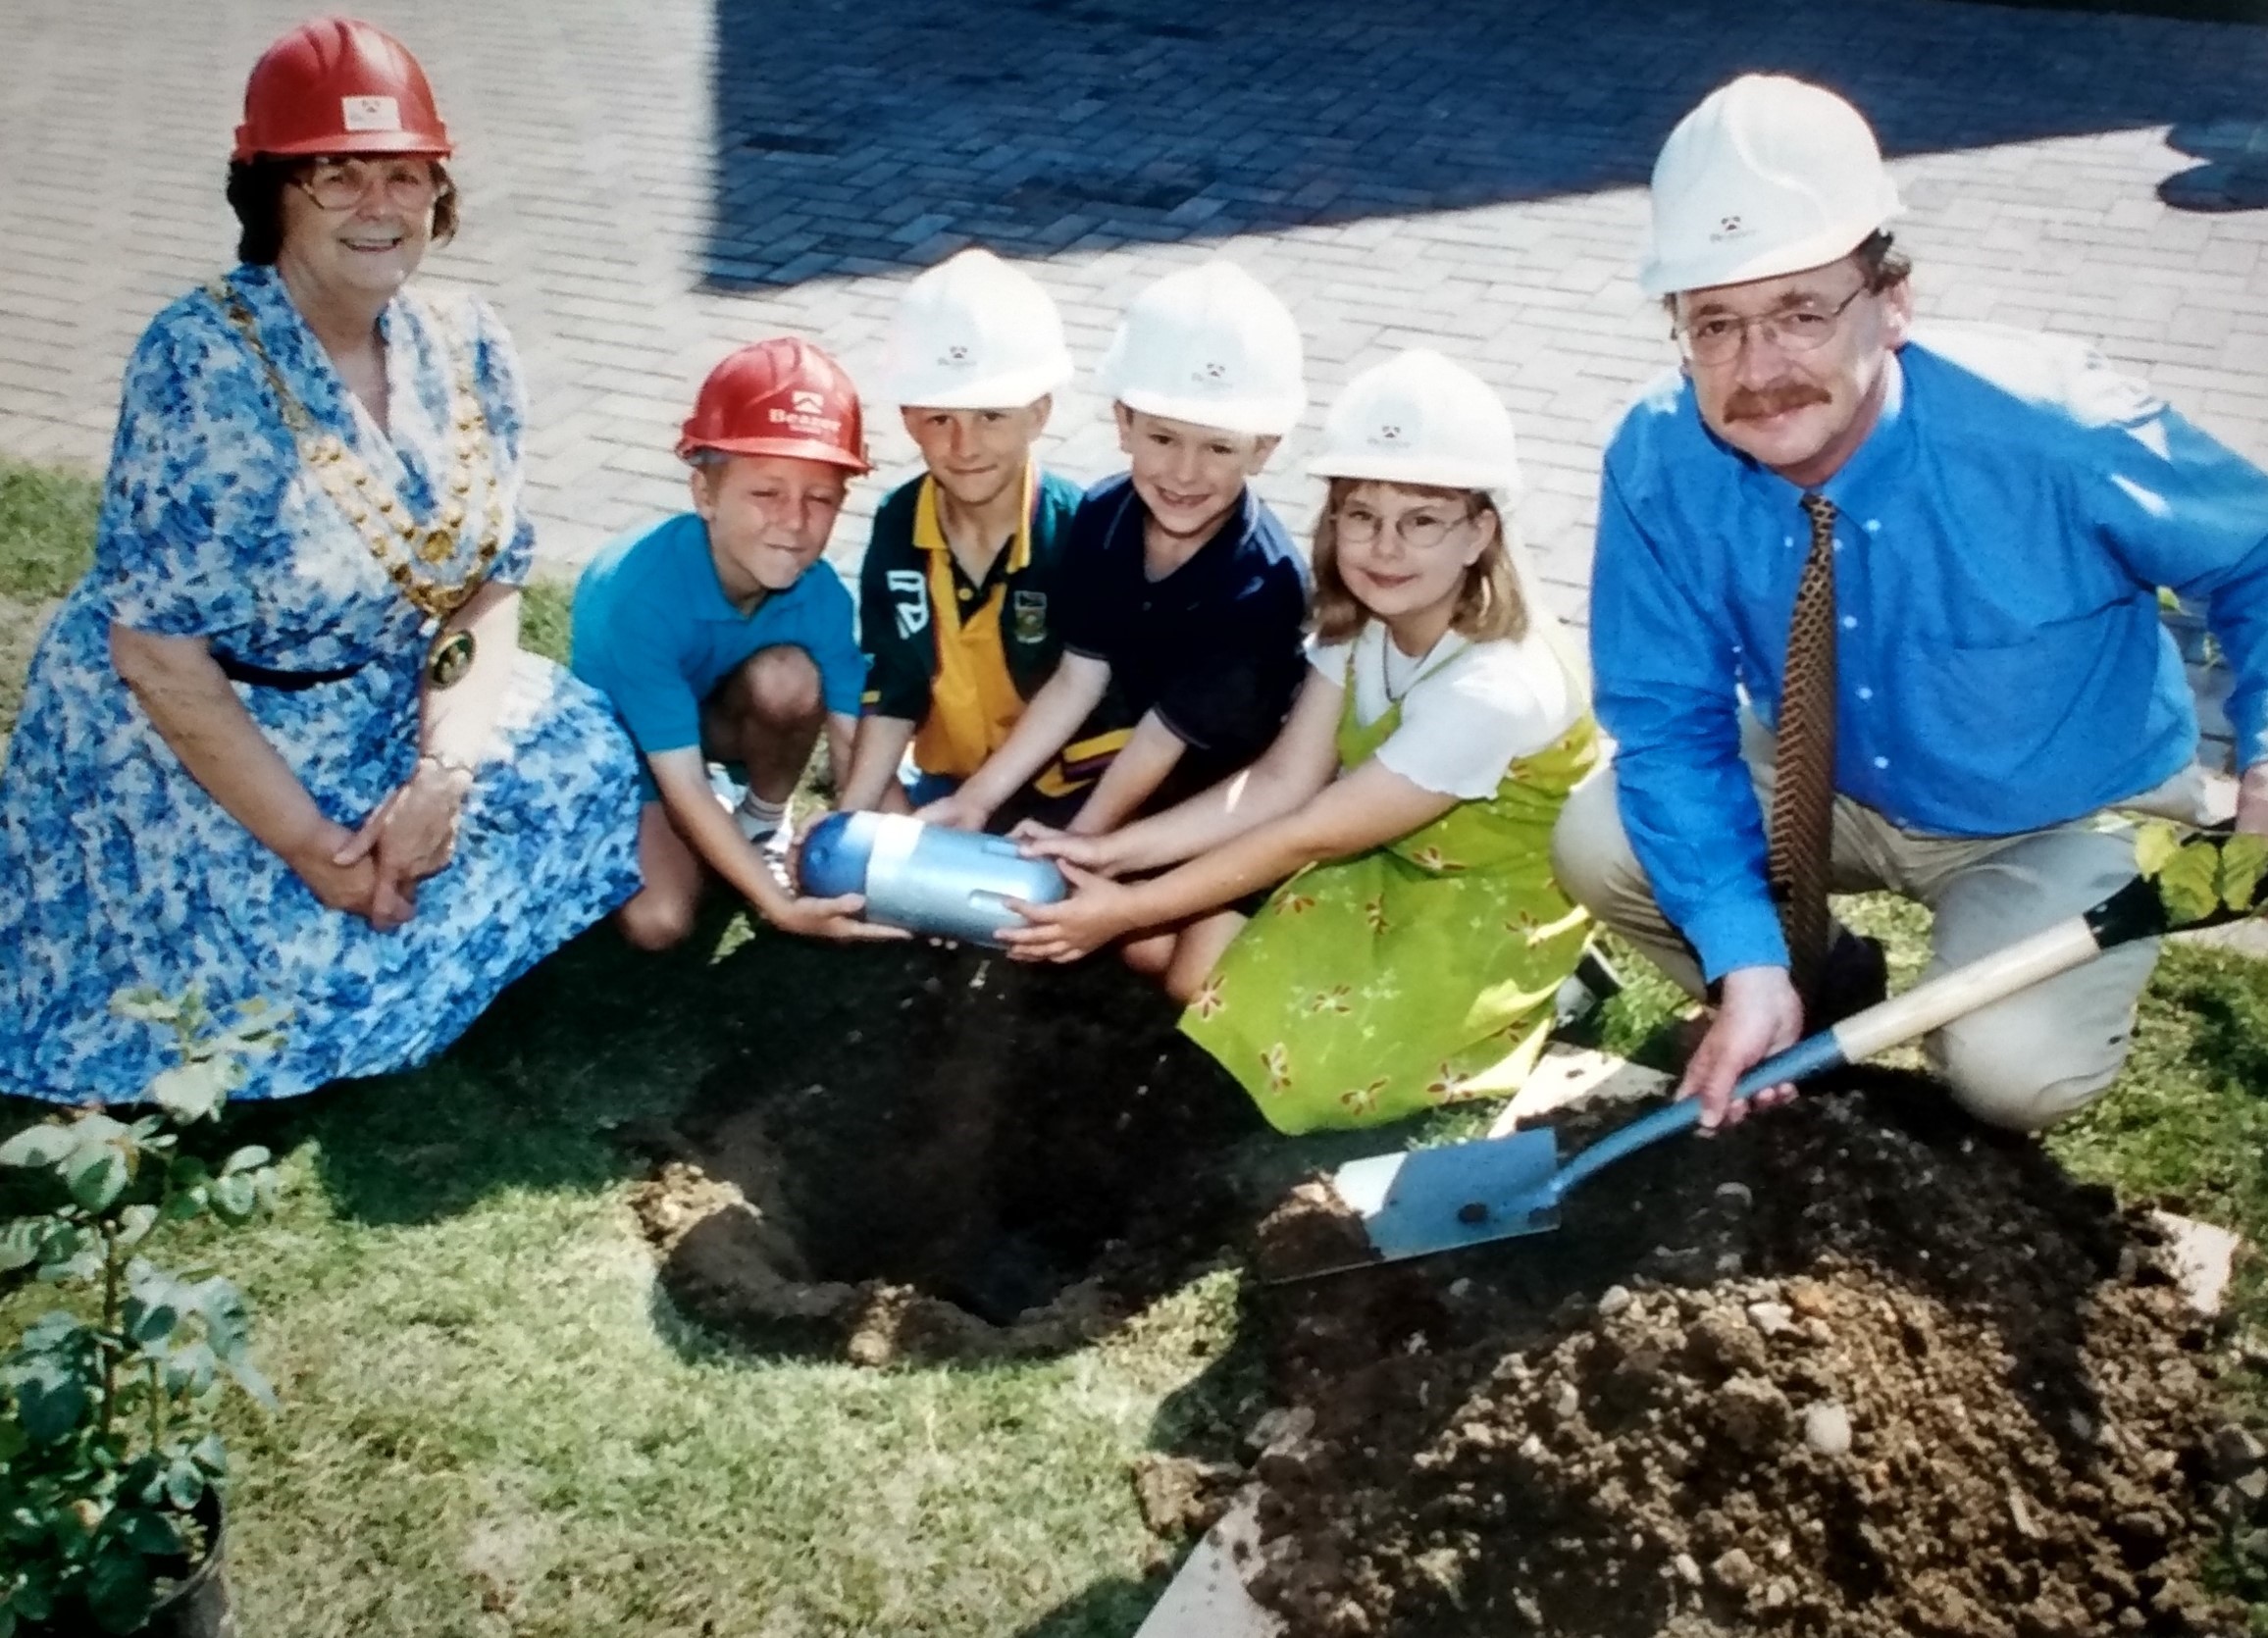 It’s July 1999 and some of the prizewinners from Abbey Park First School in Pershore prepare to bury a millennium time capsule at the new Priory Gardens housing development in the town, watched by mayor Cllr Marion Freeman